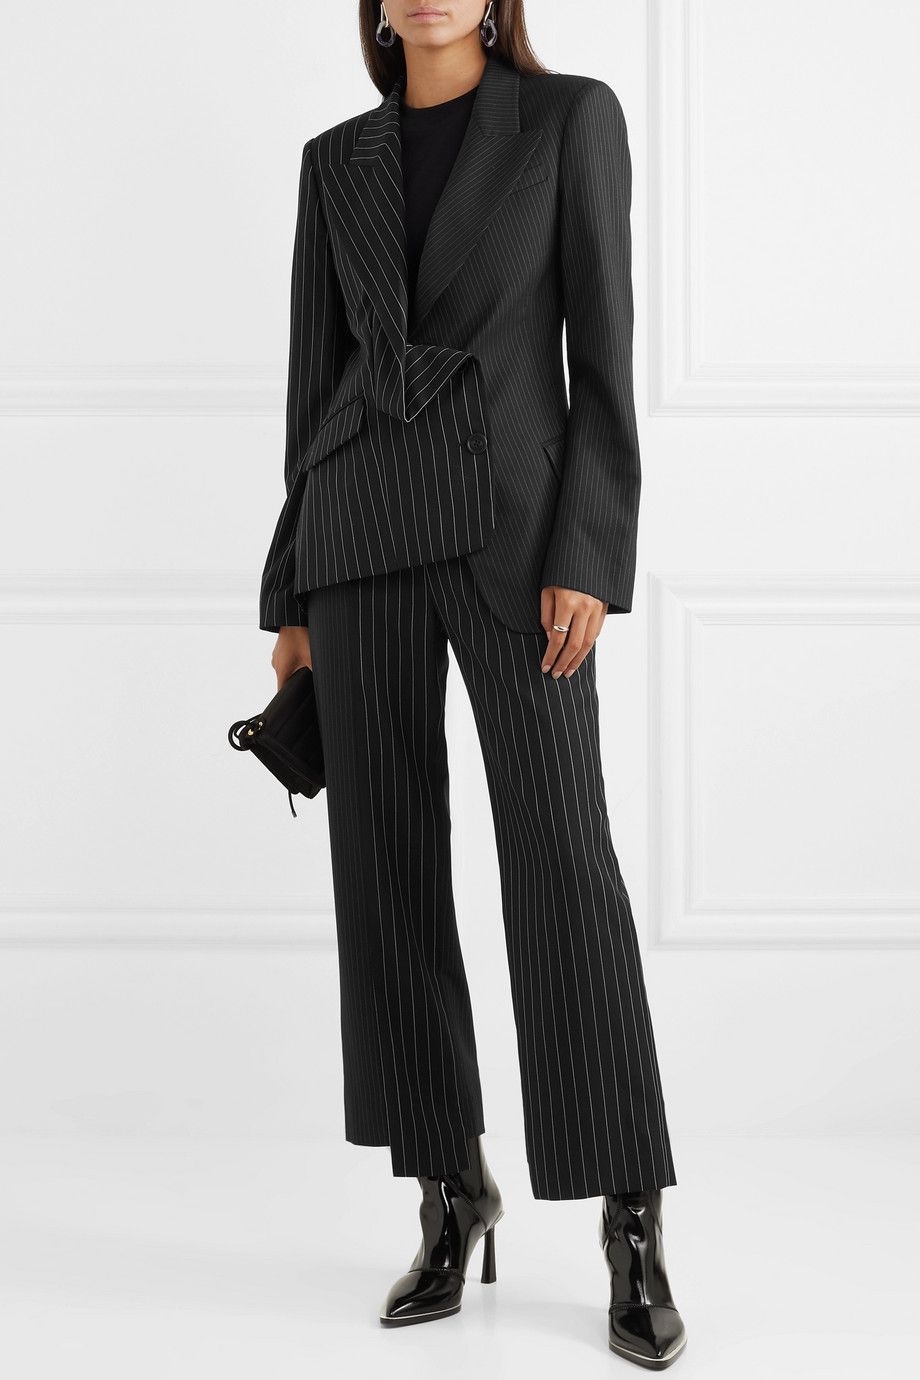 24 Fashionable Suits for Women That Are So Chic | Who What Wear